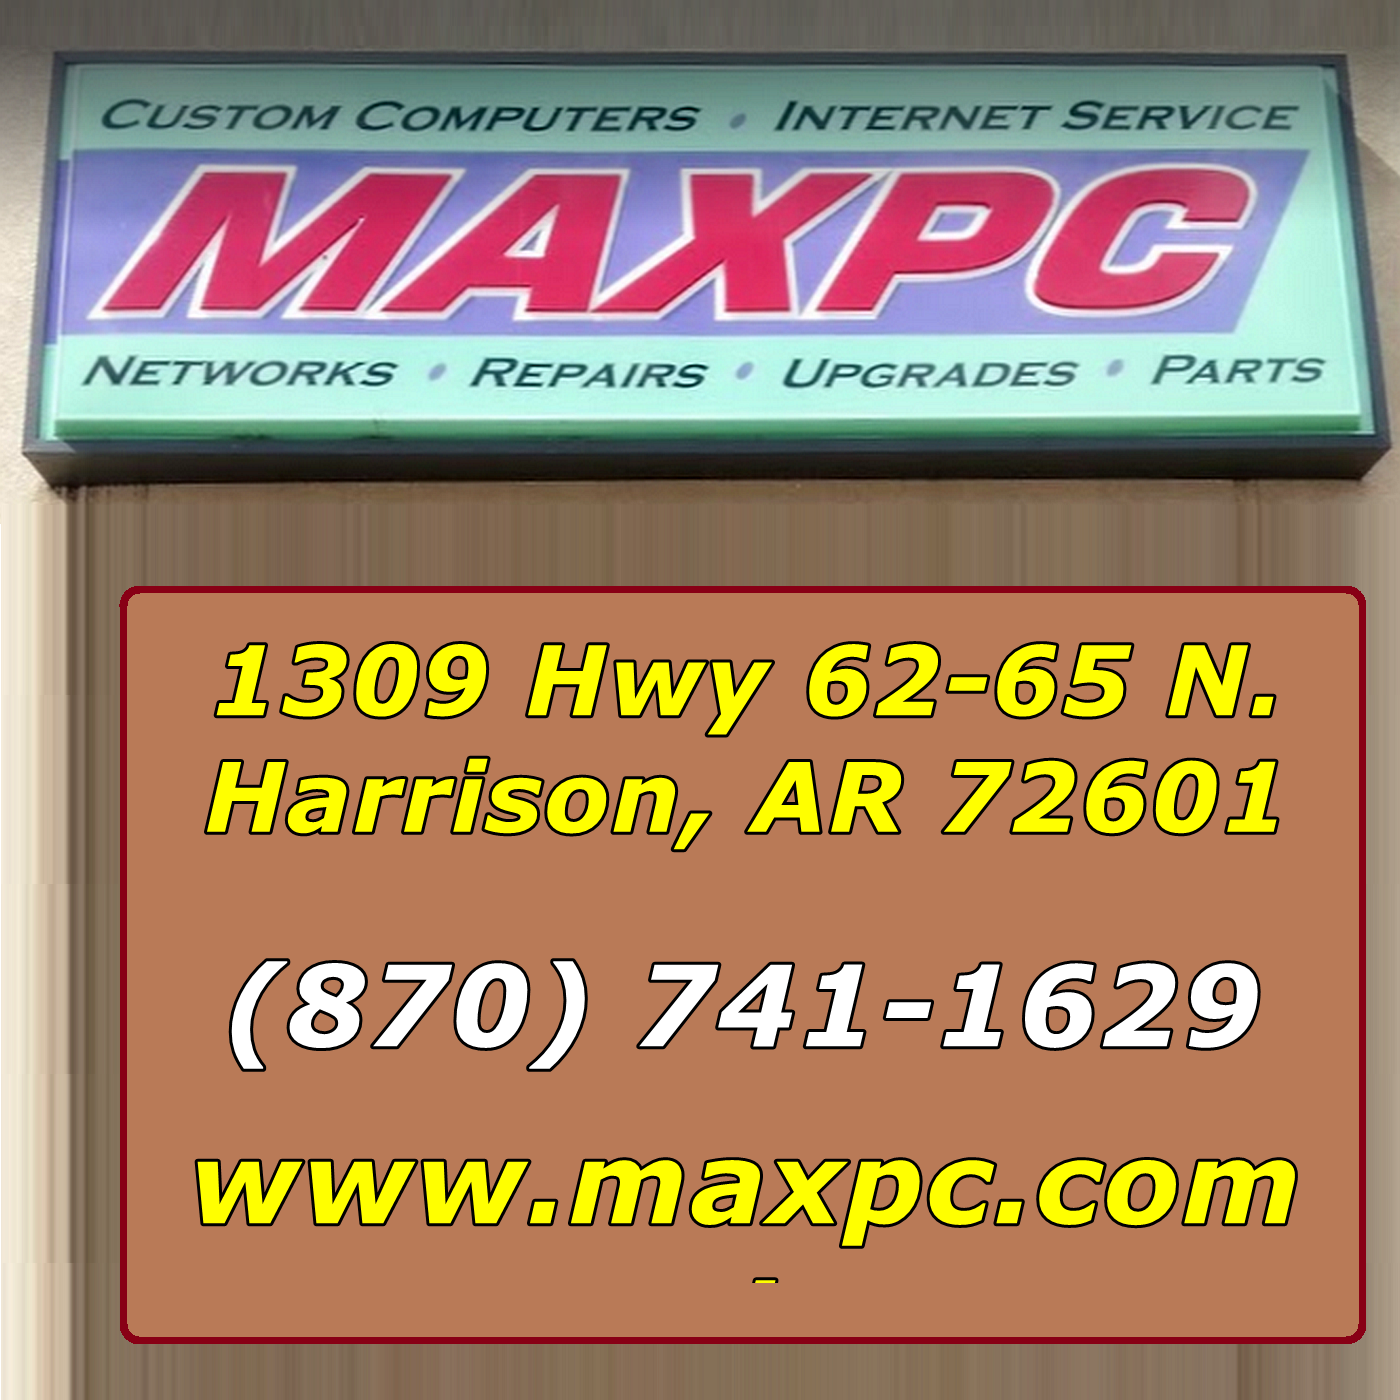 Art for MAX-PC by 1309 Hwy. 62-65 North | Harrison, AR.